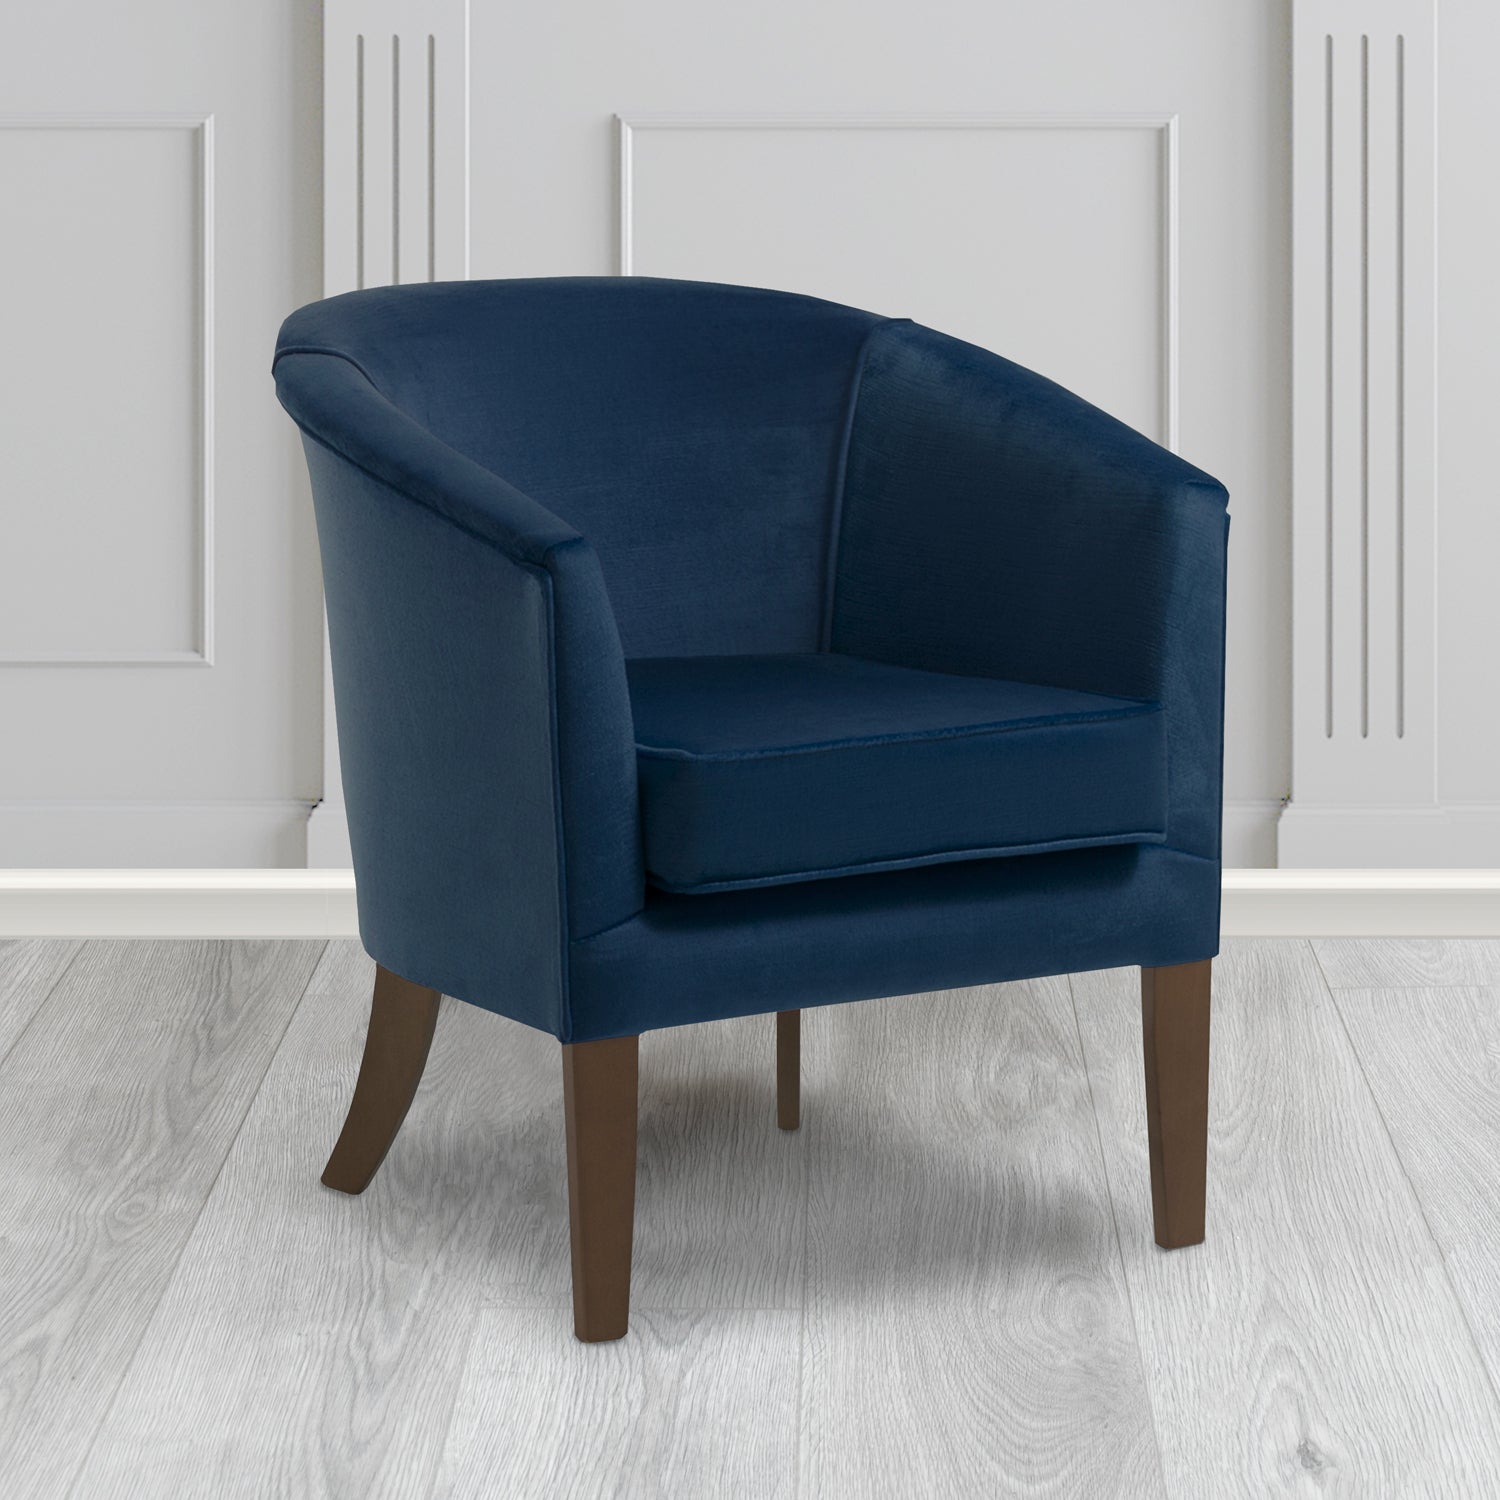 Jazz Tub Chair in Noble 133 Sapphire Crib 5 Velvet Fabric - Water Resistant - The Tub Chair Shop